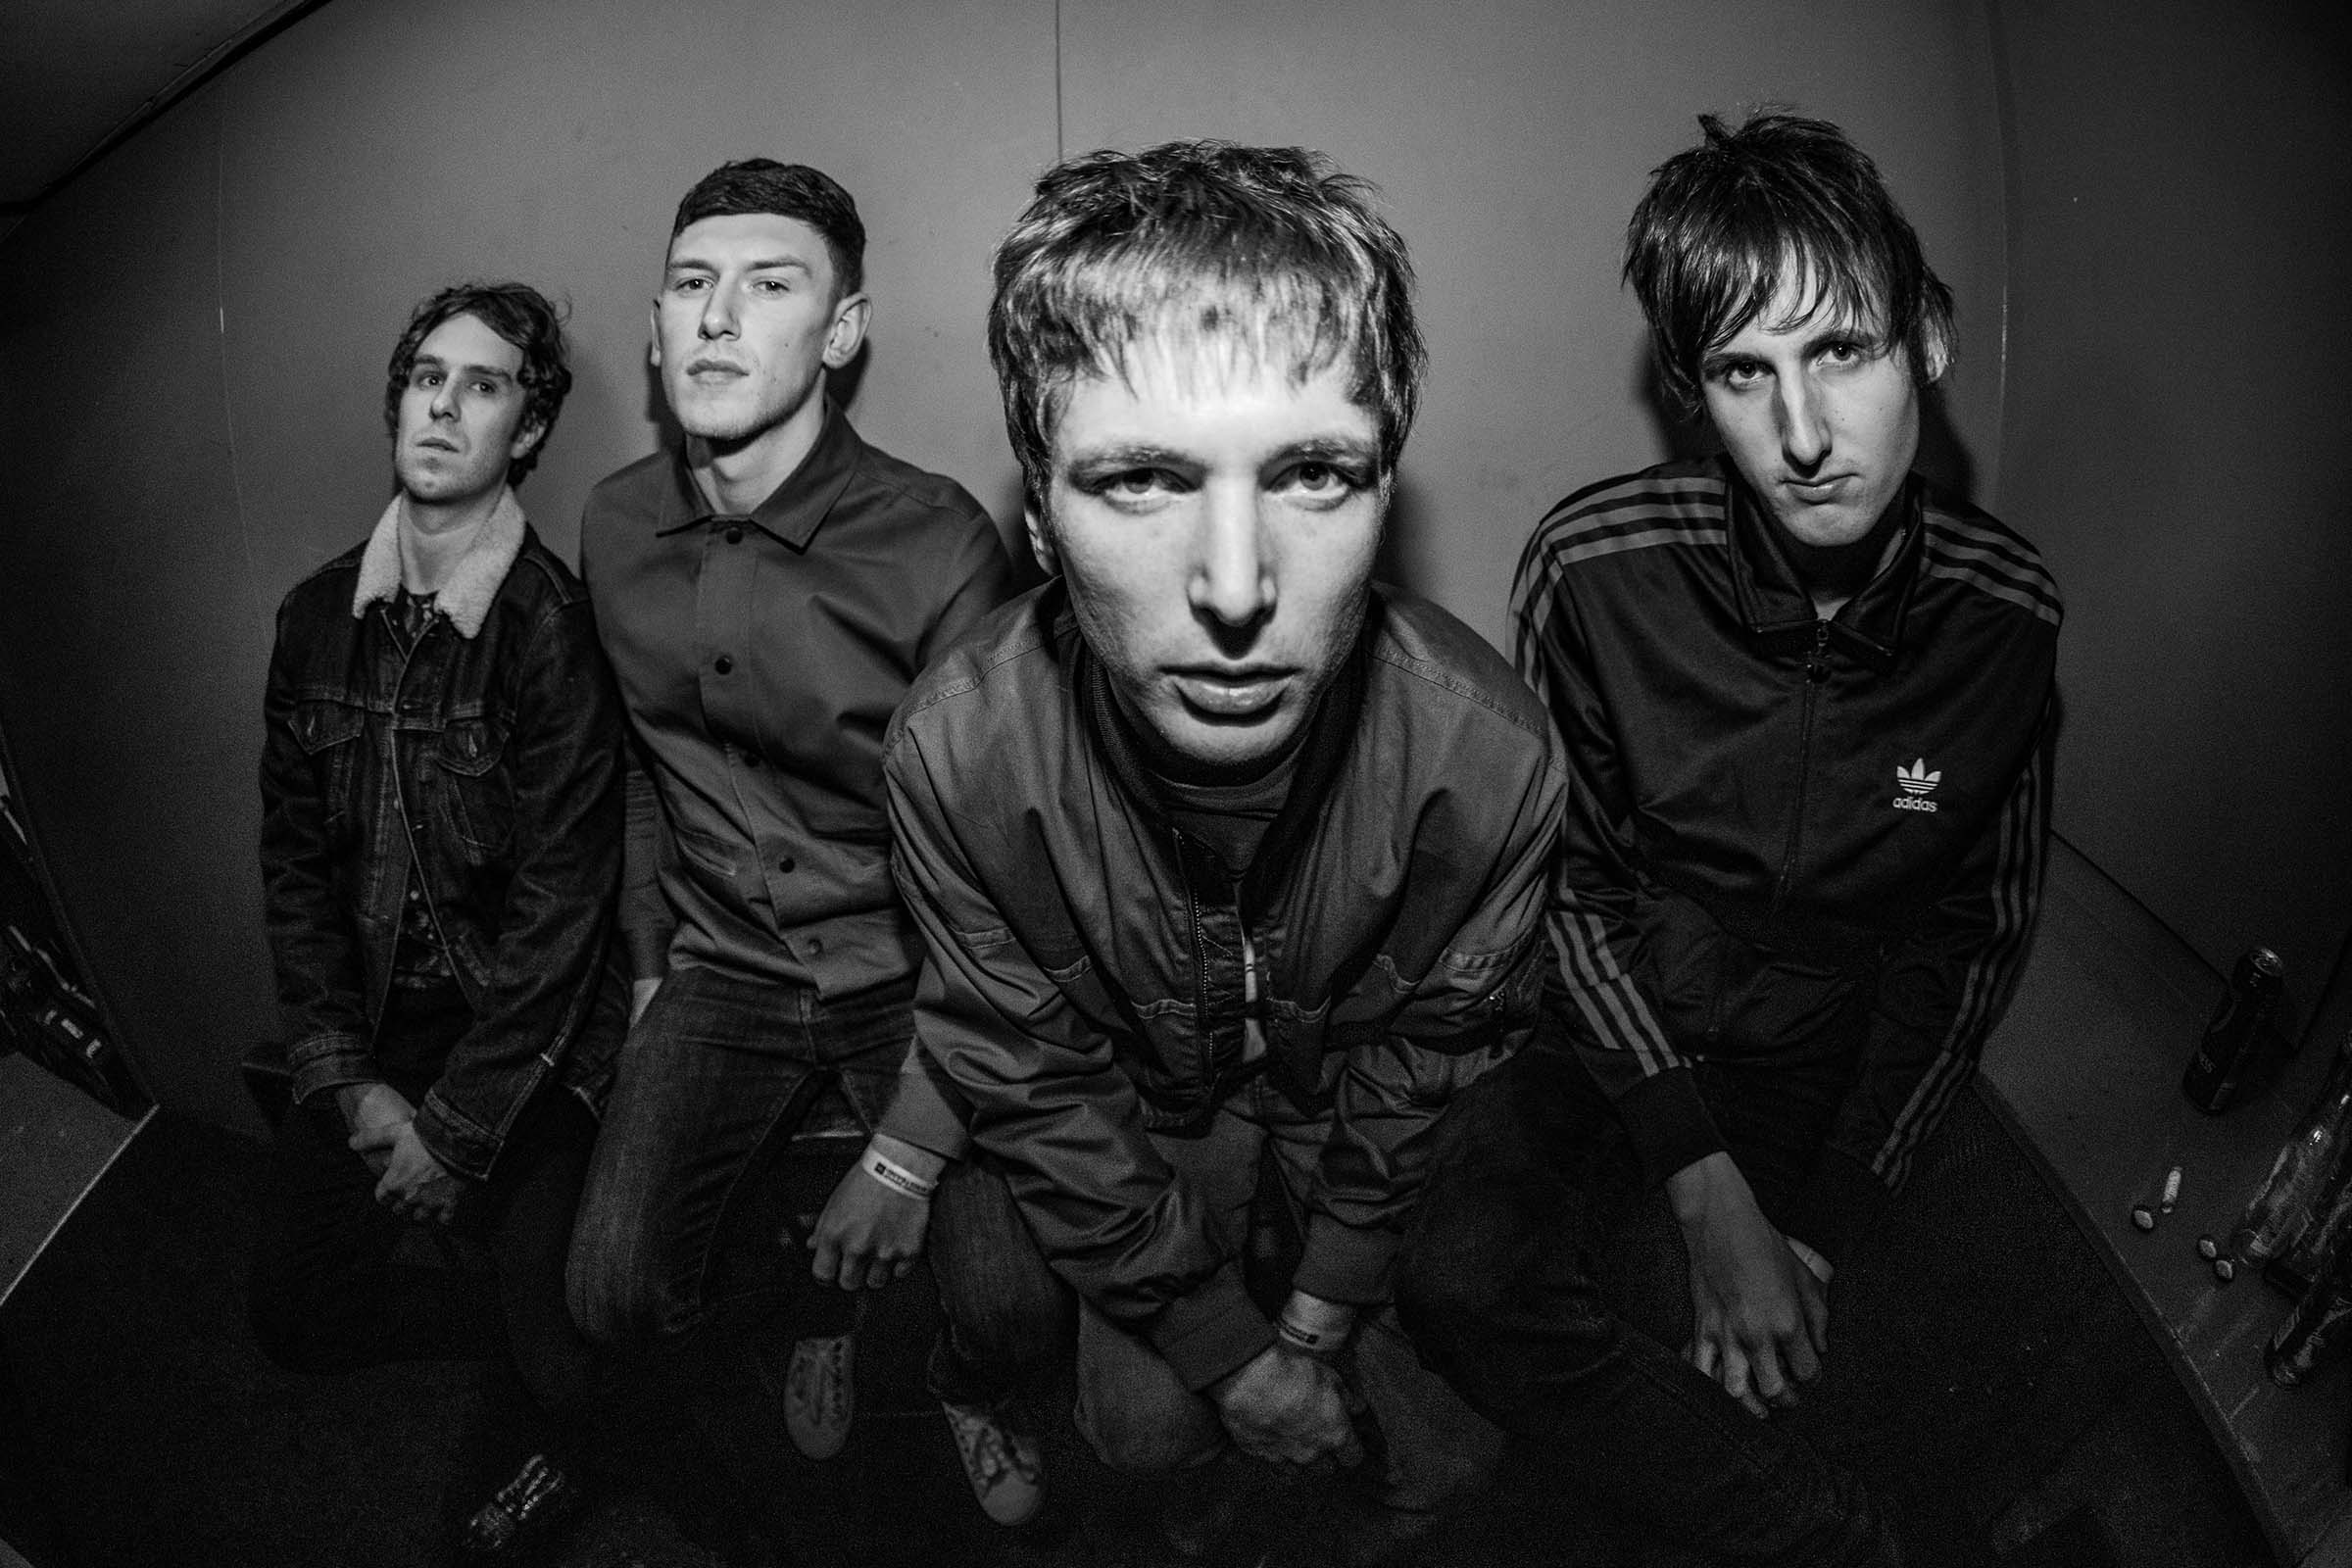 TWISTED WHEEL Announce third album 'Satisfying The Ritual' - out 20th March 1